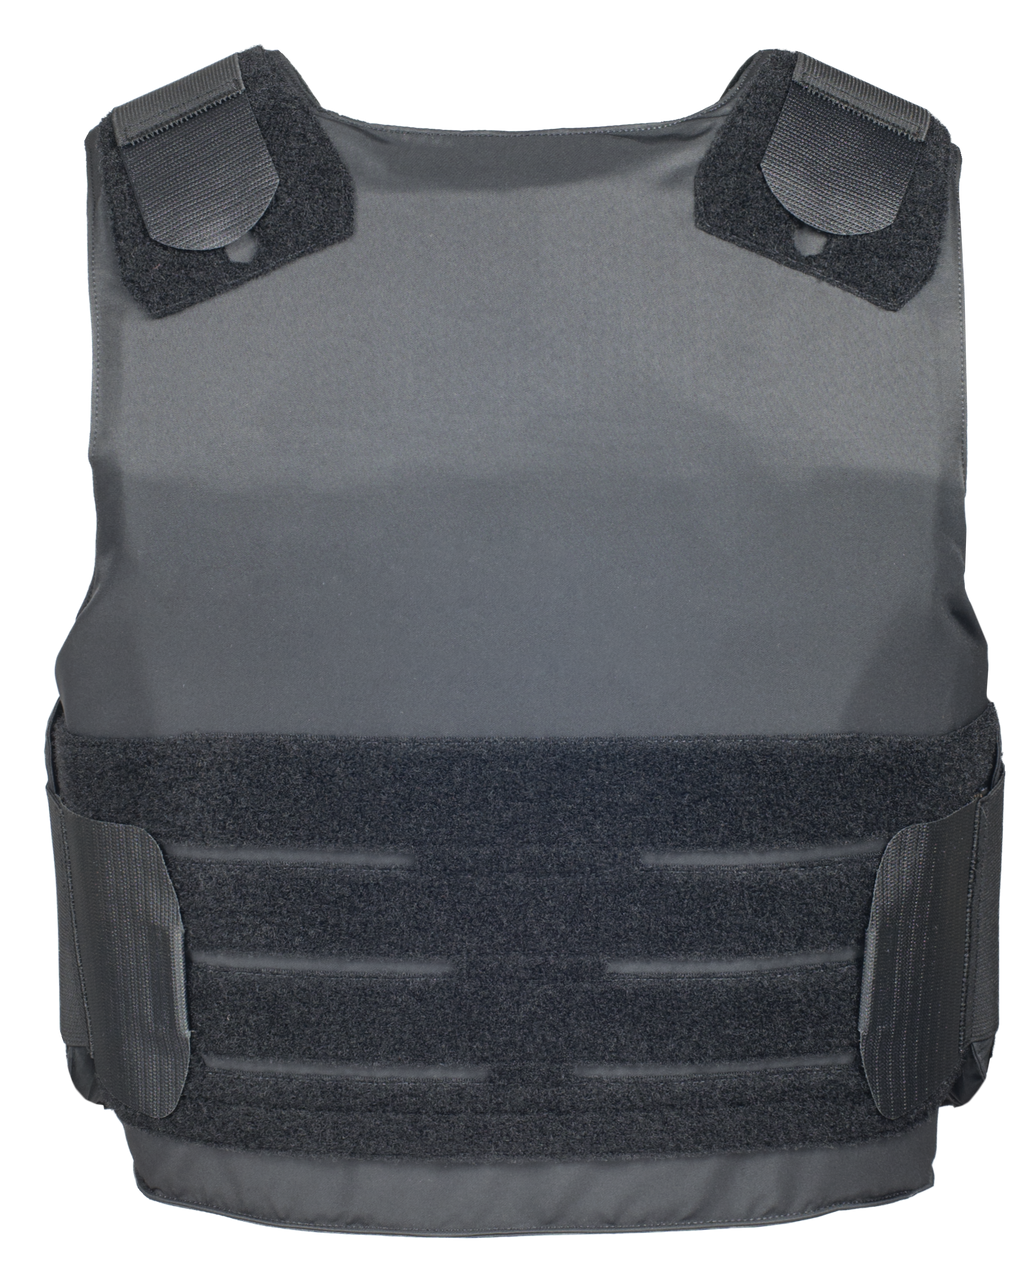 Armor Express American Revolution Men's Concealable Ballistic Body Armor Carrier, Choose Carrier only or Carrier and Panels (Soft Armor), NIJ Certified - Level 2, or Level 3A Threat Level - Interior suspension helps prevent sagging of armor